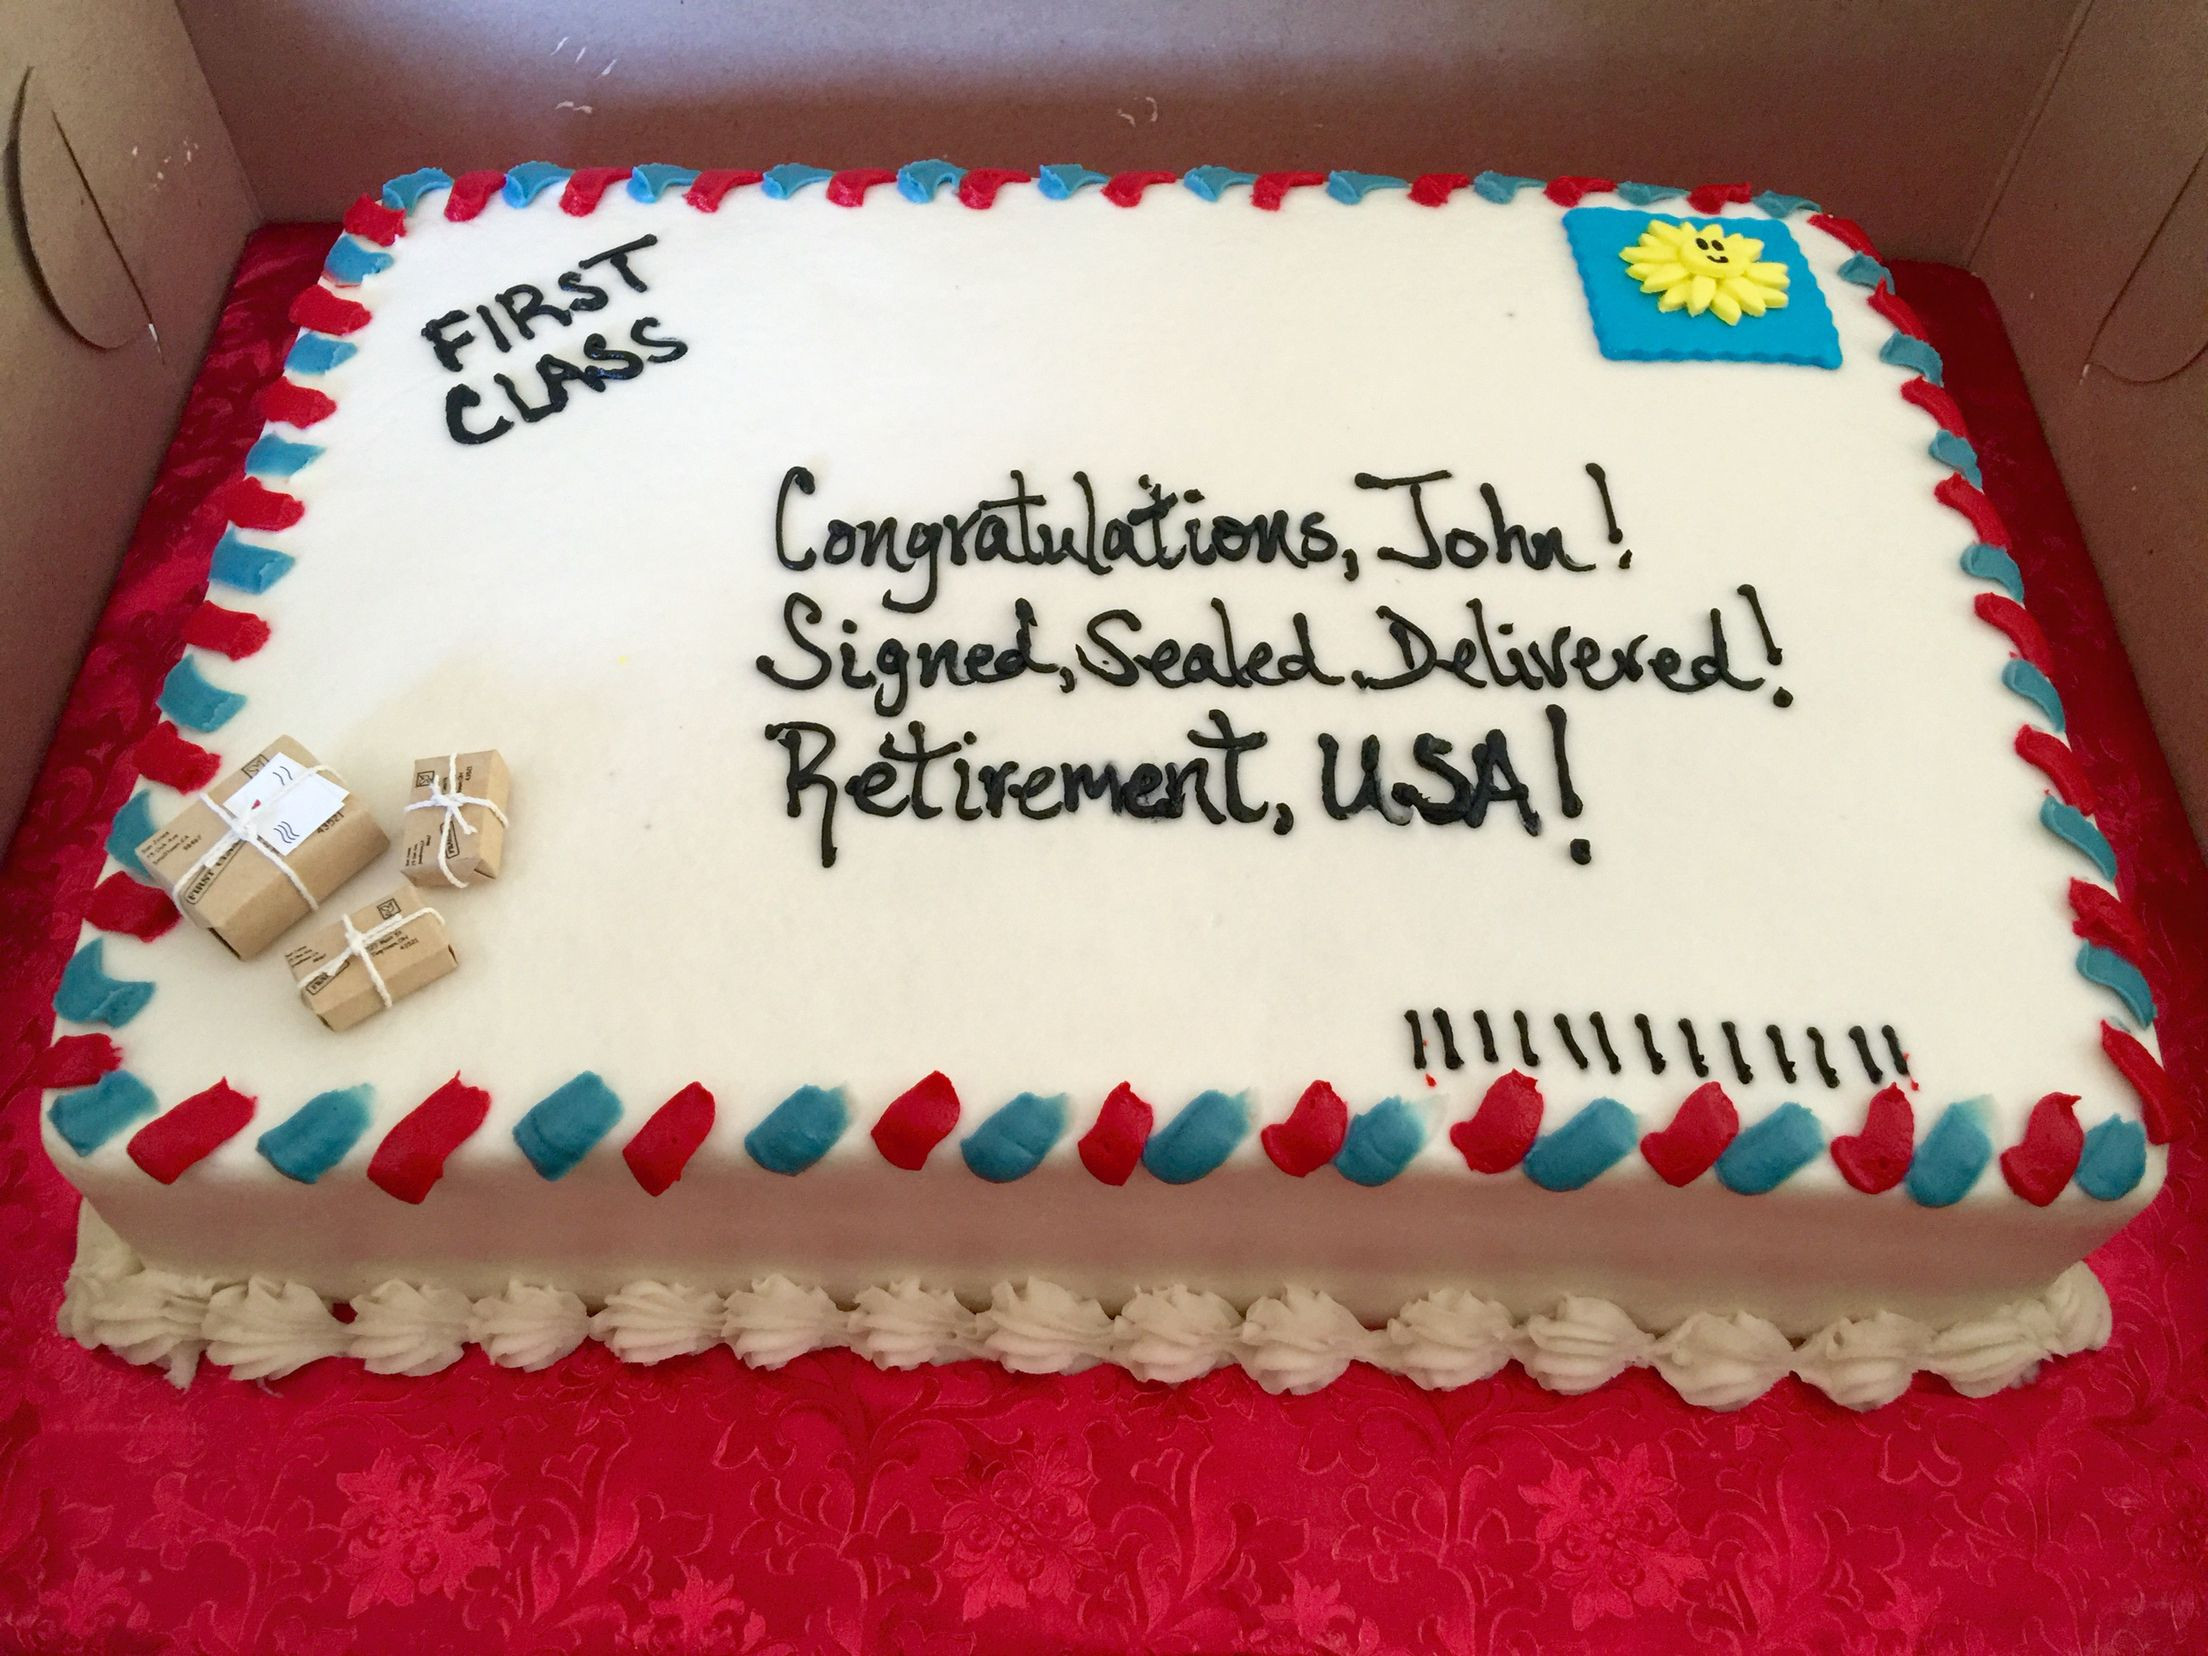 Cake Decorating Ideas For Retirement Party
 Simple decorating idea for a cake for a mailman